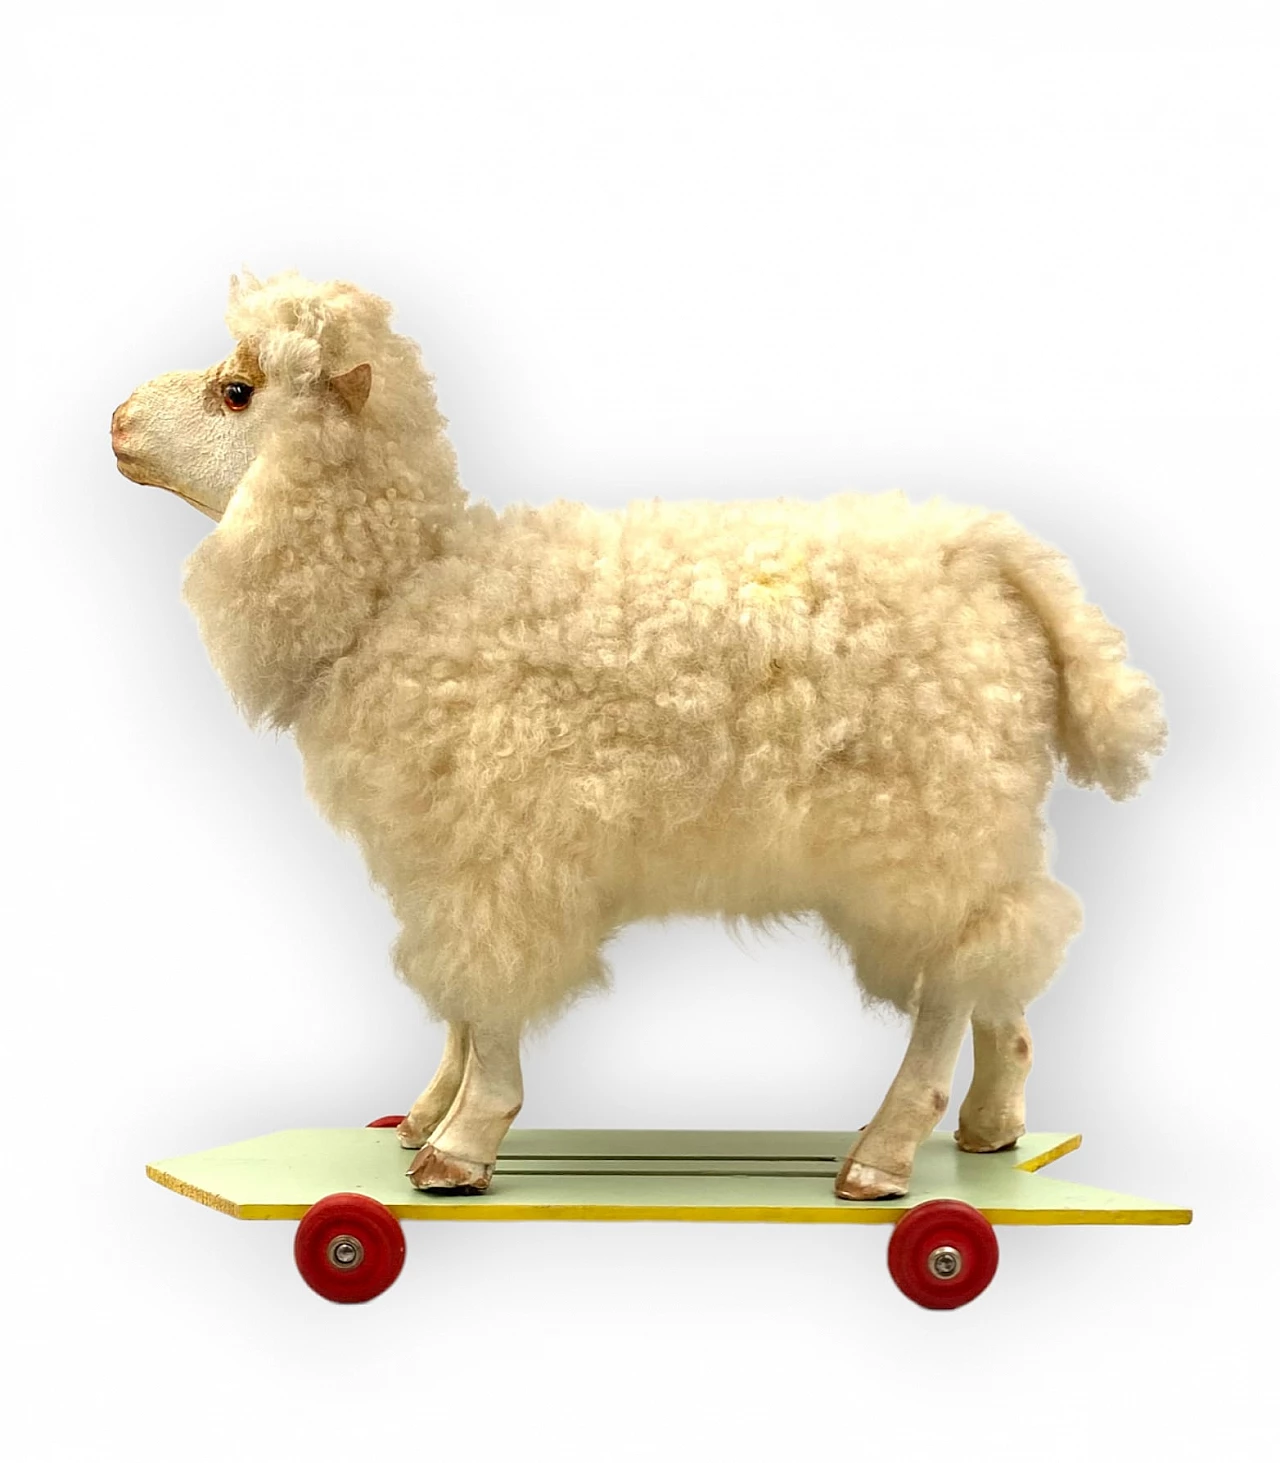 Wool and wood toy sheep with wheels 6